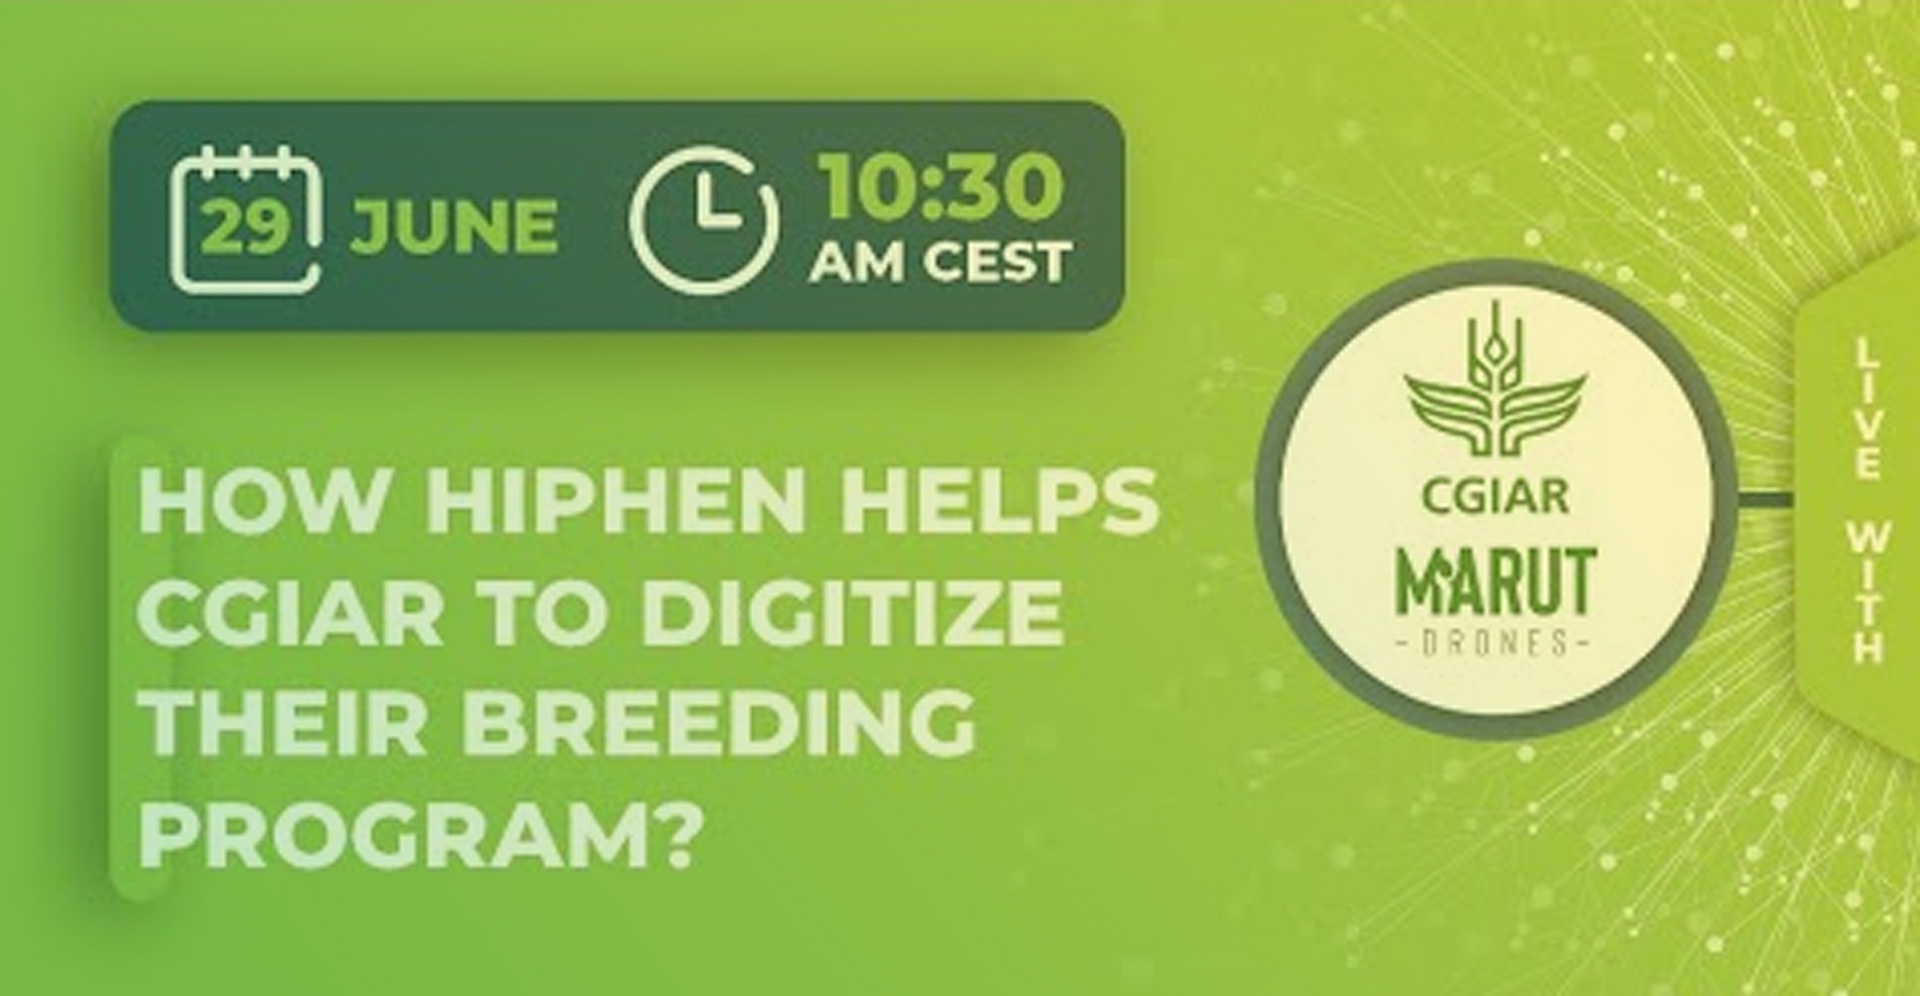 Discover how Hiphen helps CGIAR to digitize their breeding program